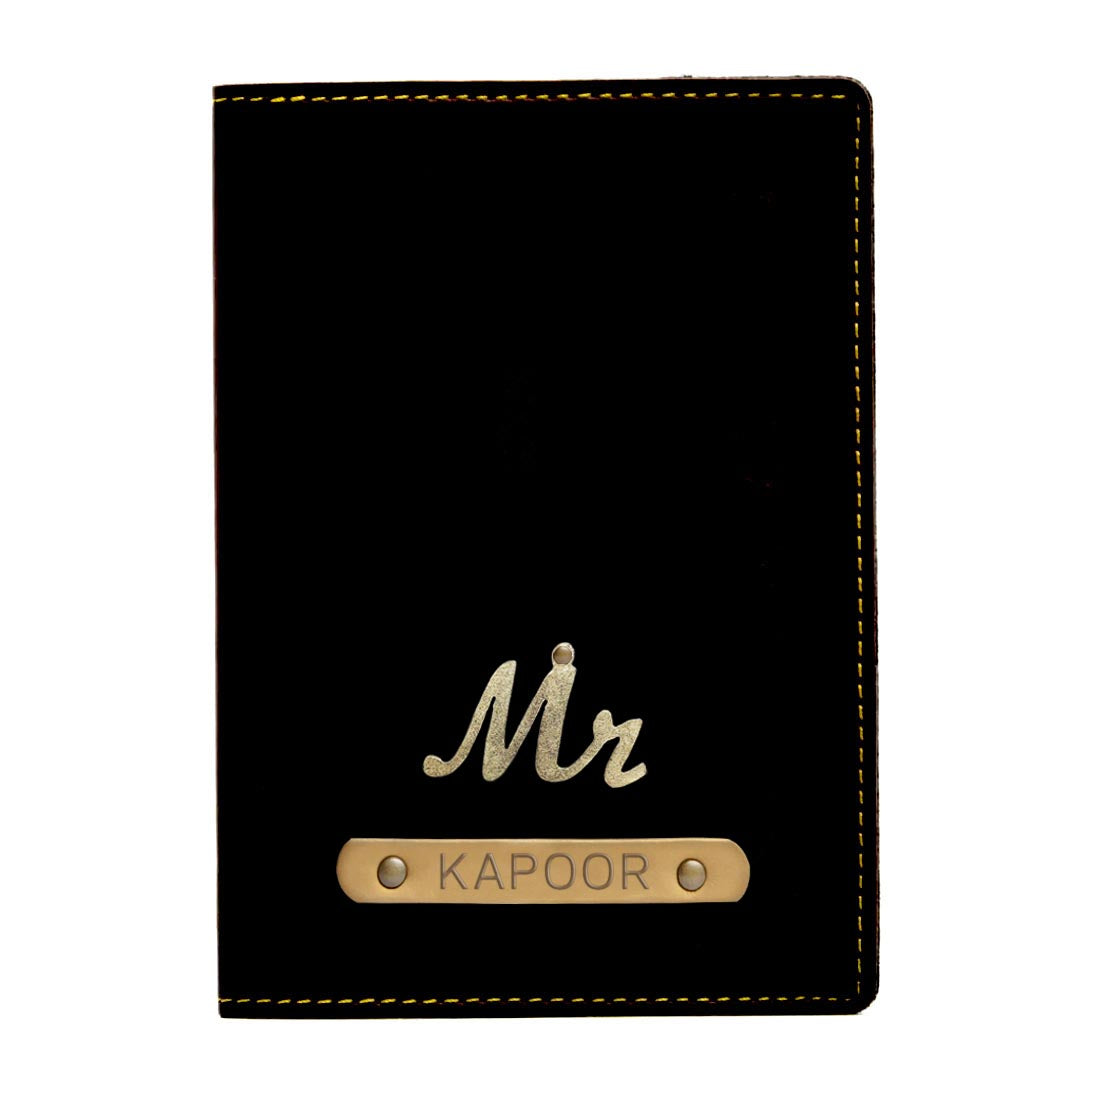 Personalized Name Mr & Mrs Passport Cover for Couples Travel Gifts with Charm